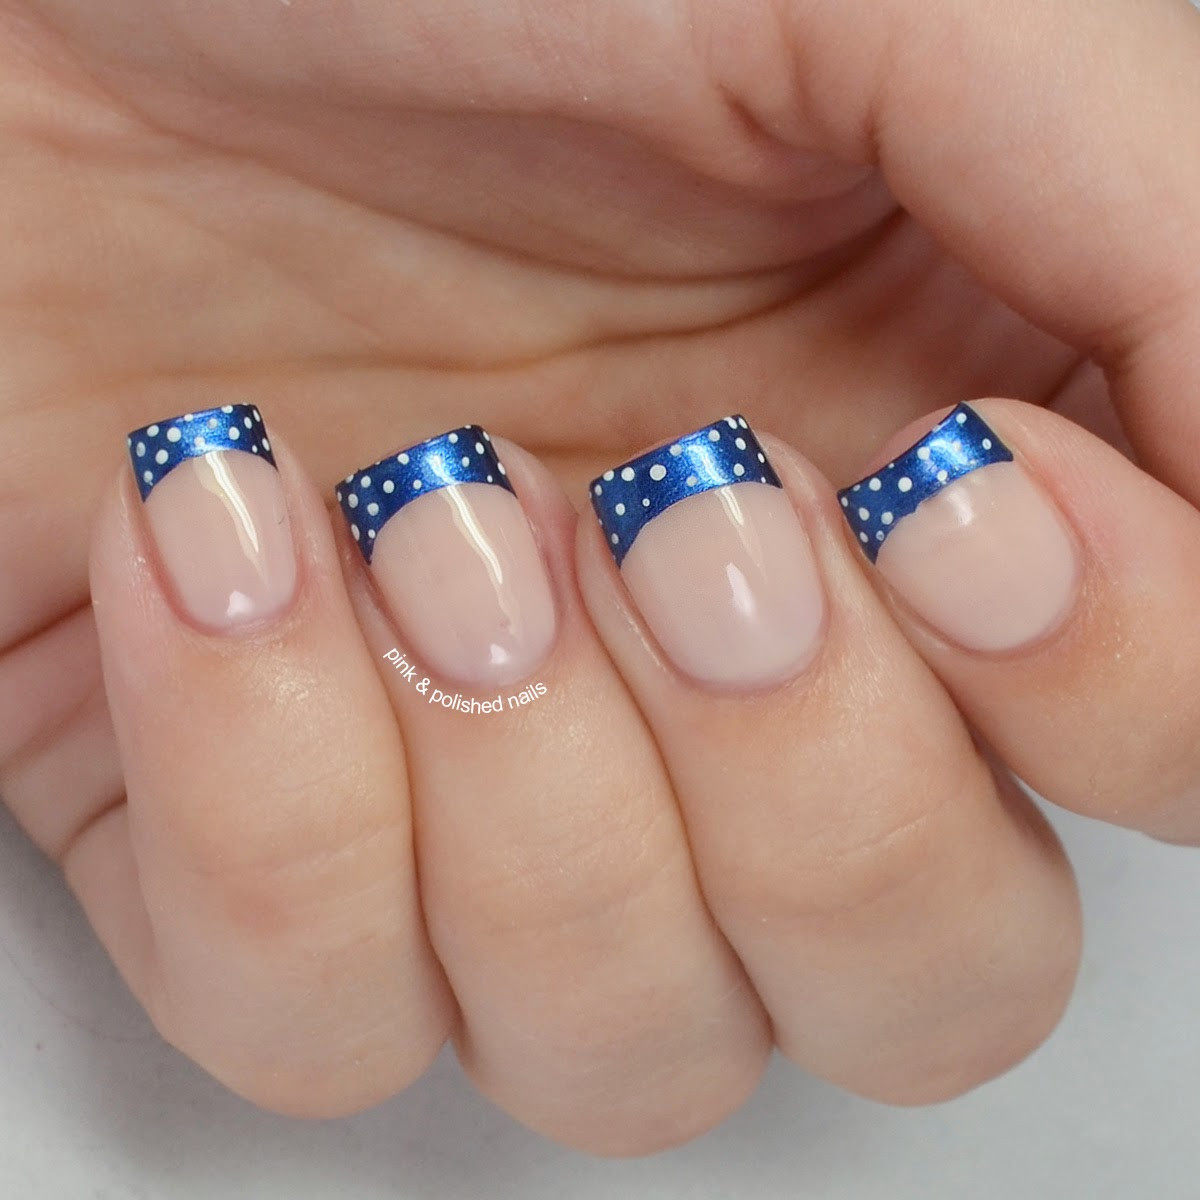 Blue French Tip Nail Designs
 Pink & Polished Navy french tips with white baby dots